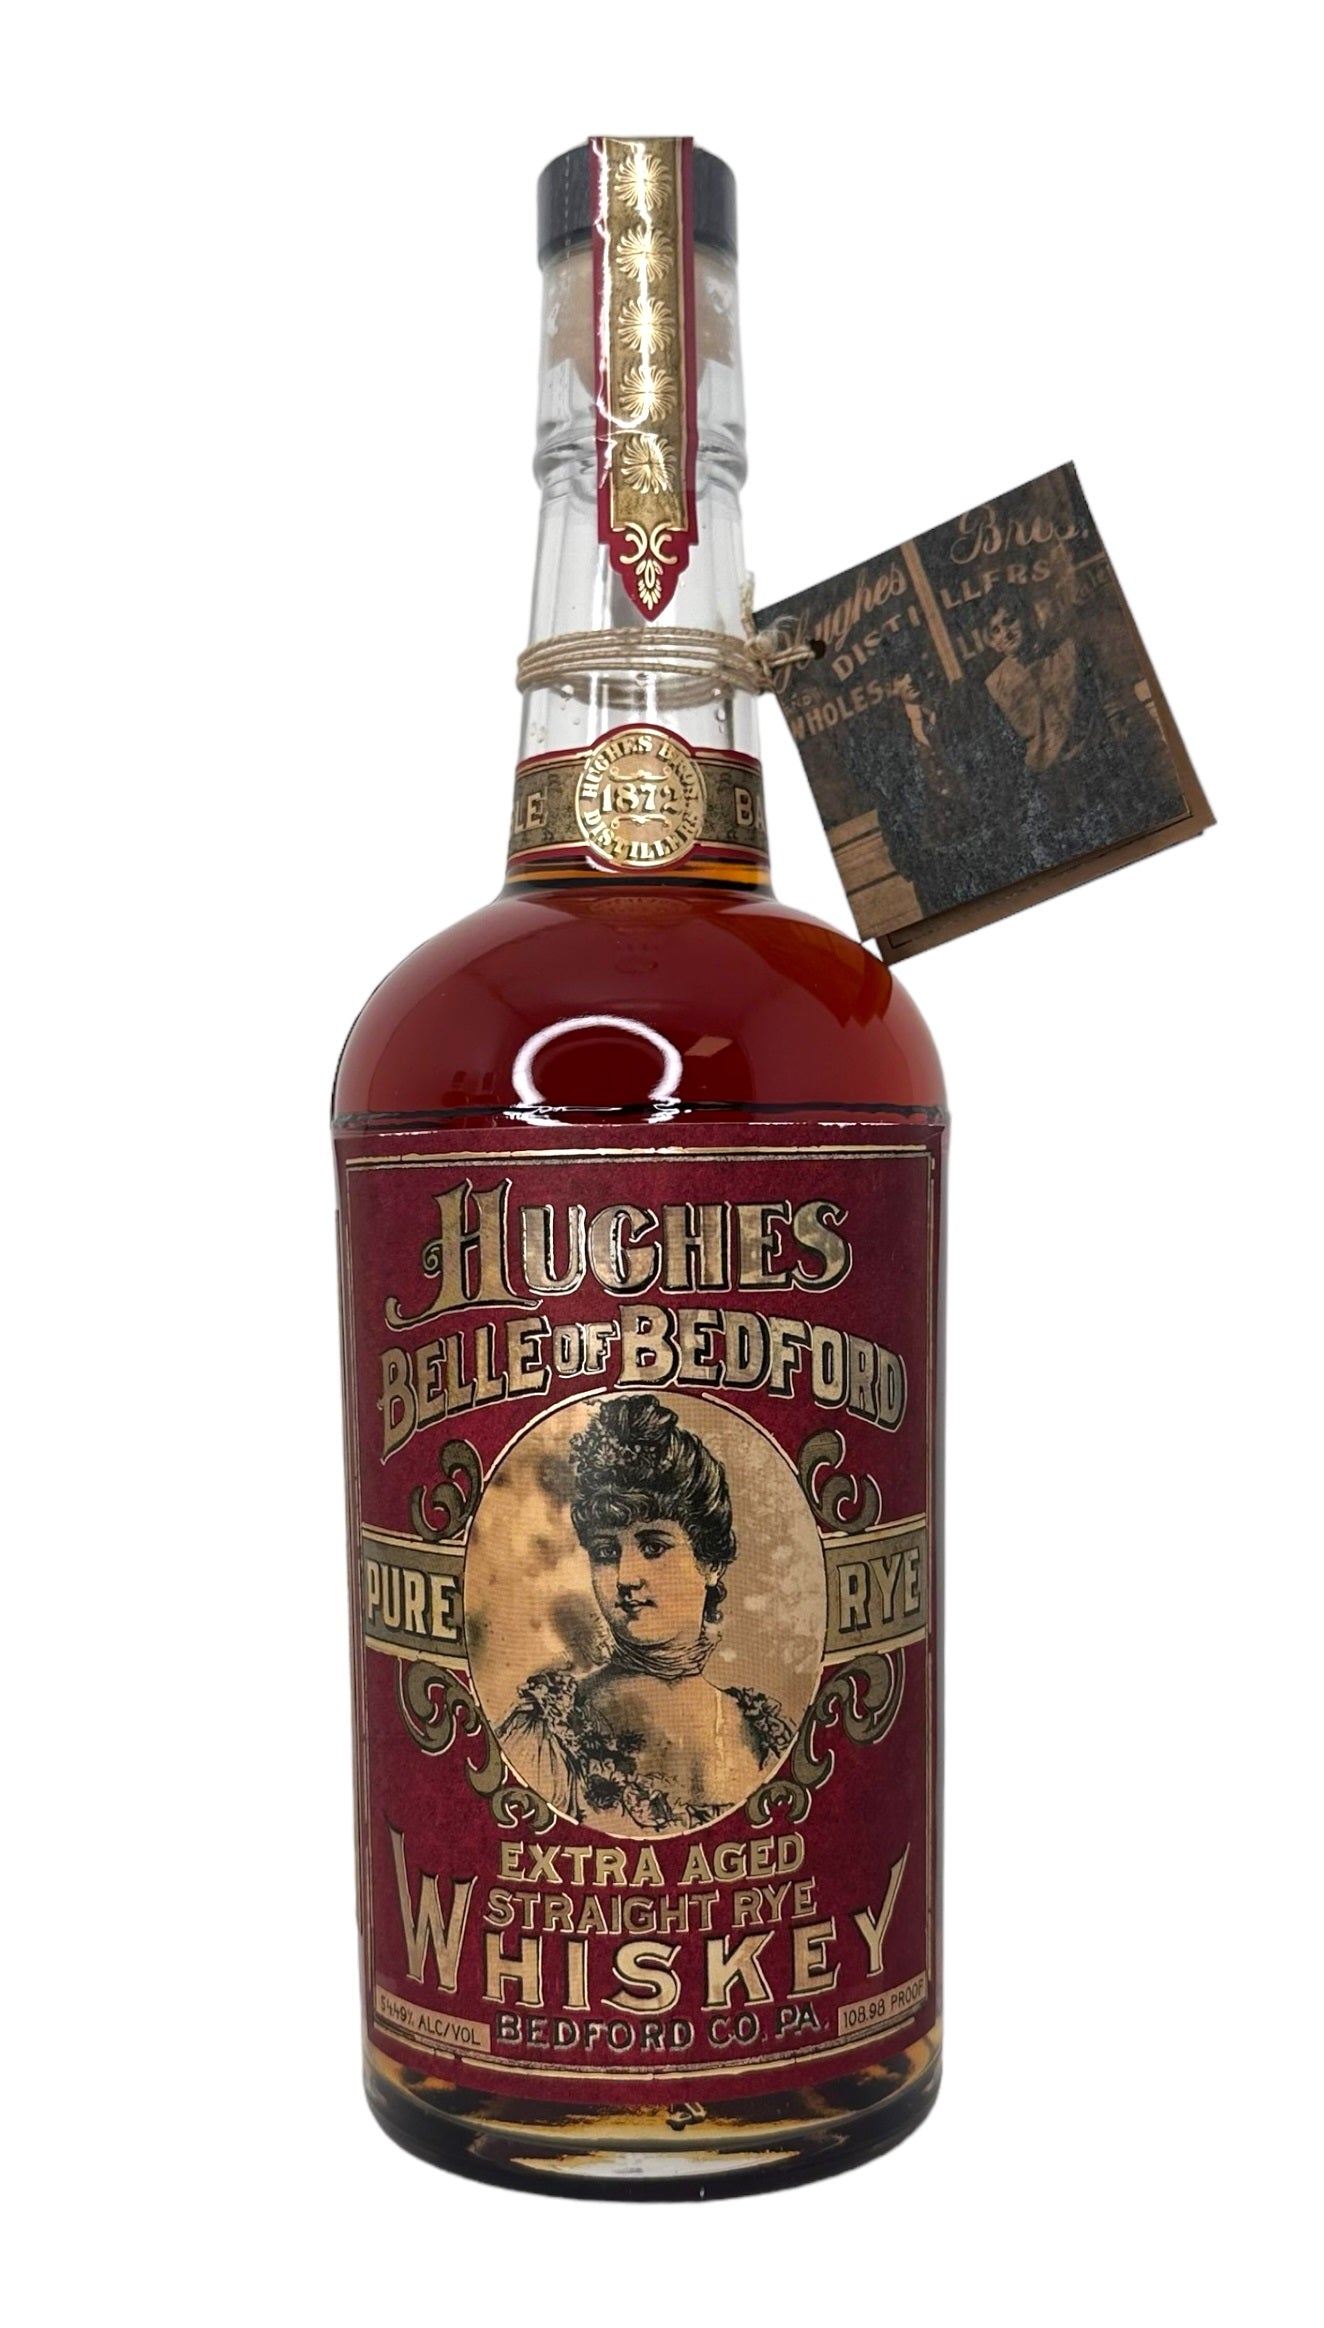 Image of Hughes Brothers "Belle of Bedford" Extra Aged 10-Year Single Barrel Rye Whiskey #3801